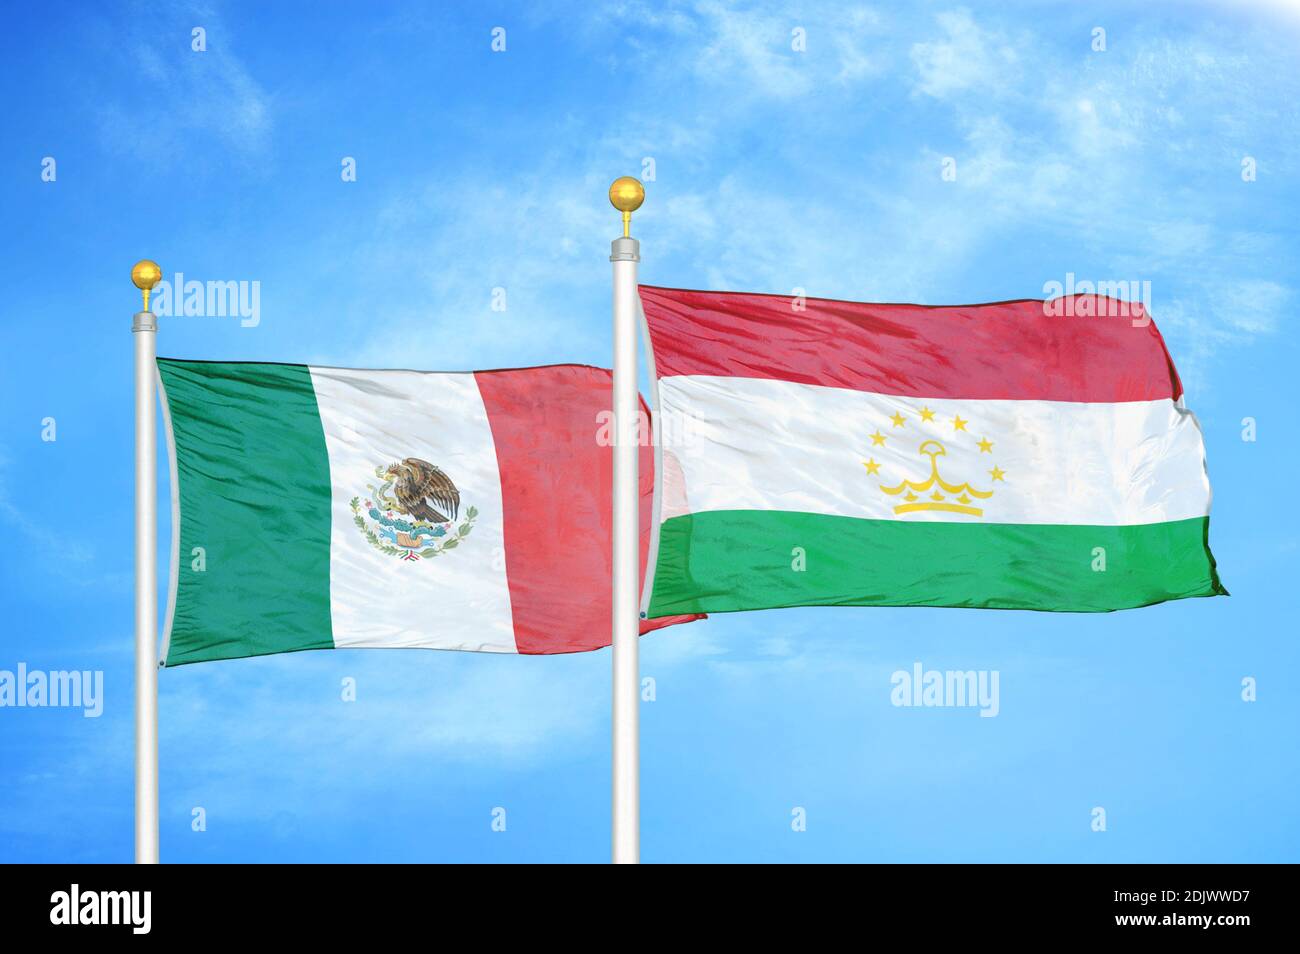 Mexico and Tajikistan two flags on flagpoles and blue cloudy sky Stock Photo